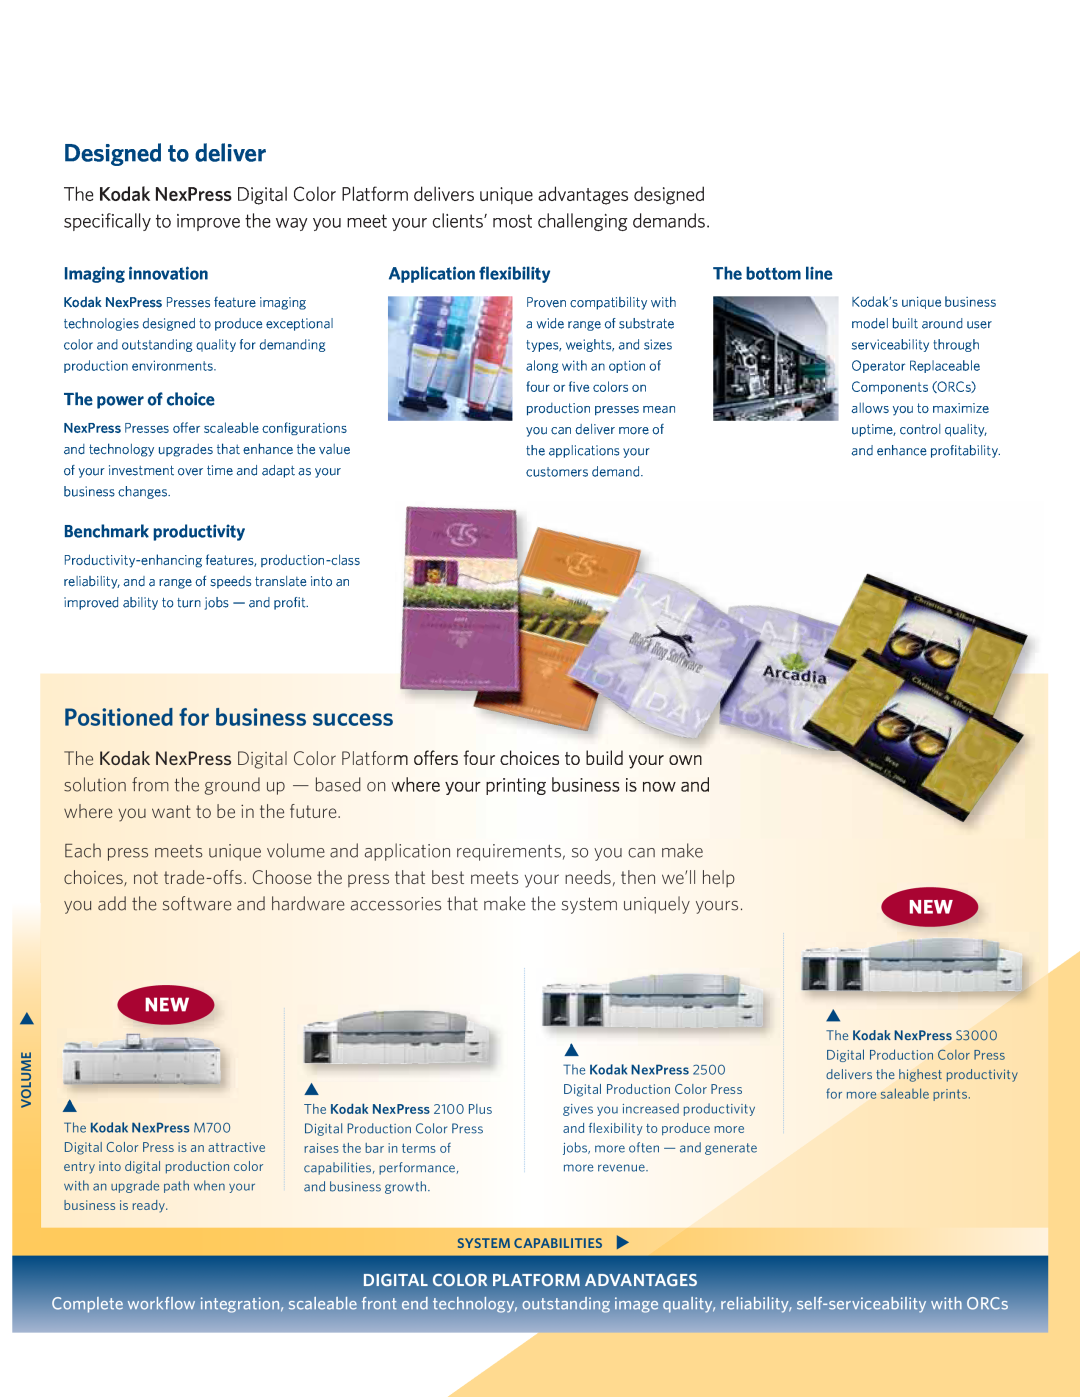 Kodak M700 manual Designed to deliver, Positioned for business success, Imaging innovation, Application ﬂexibility 